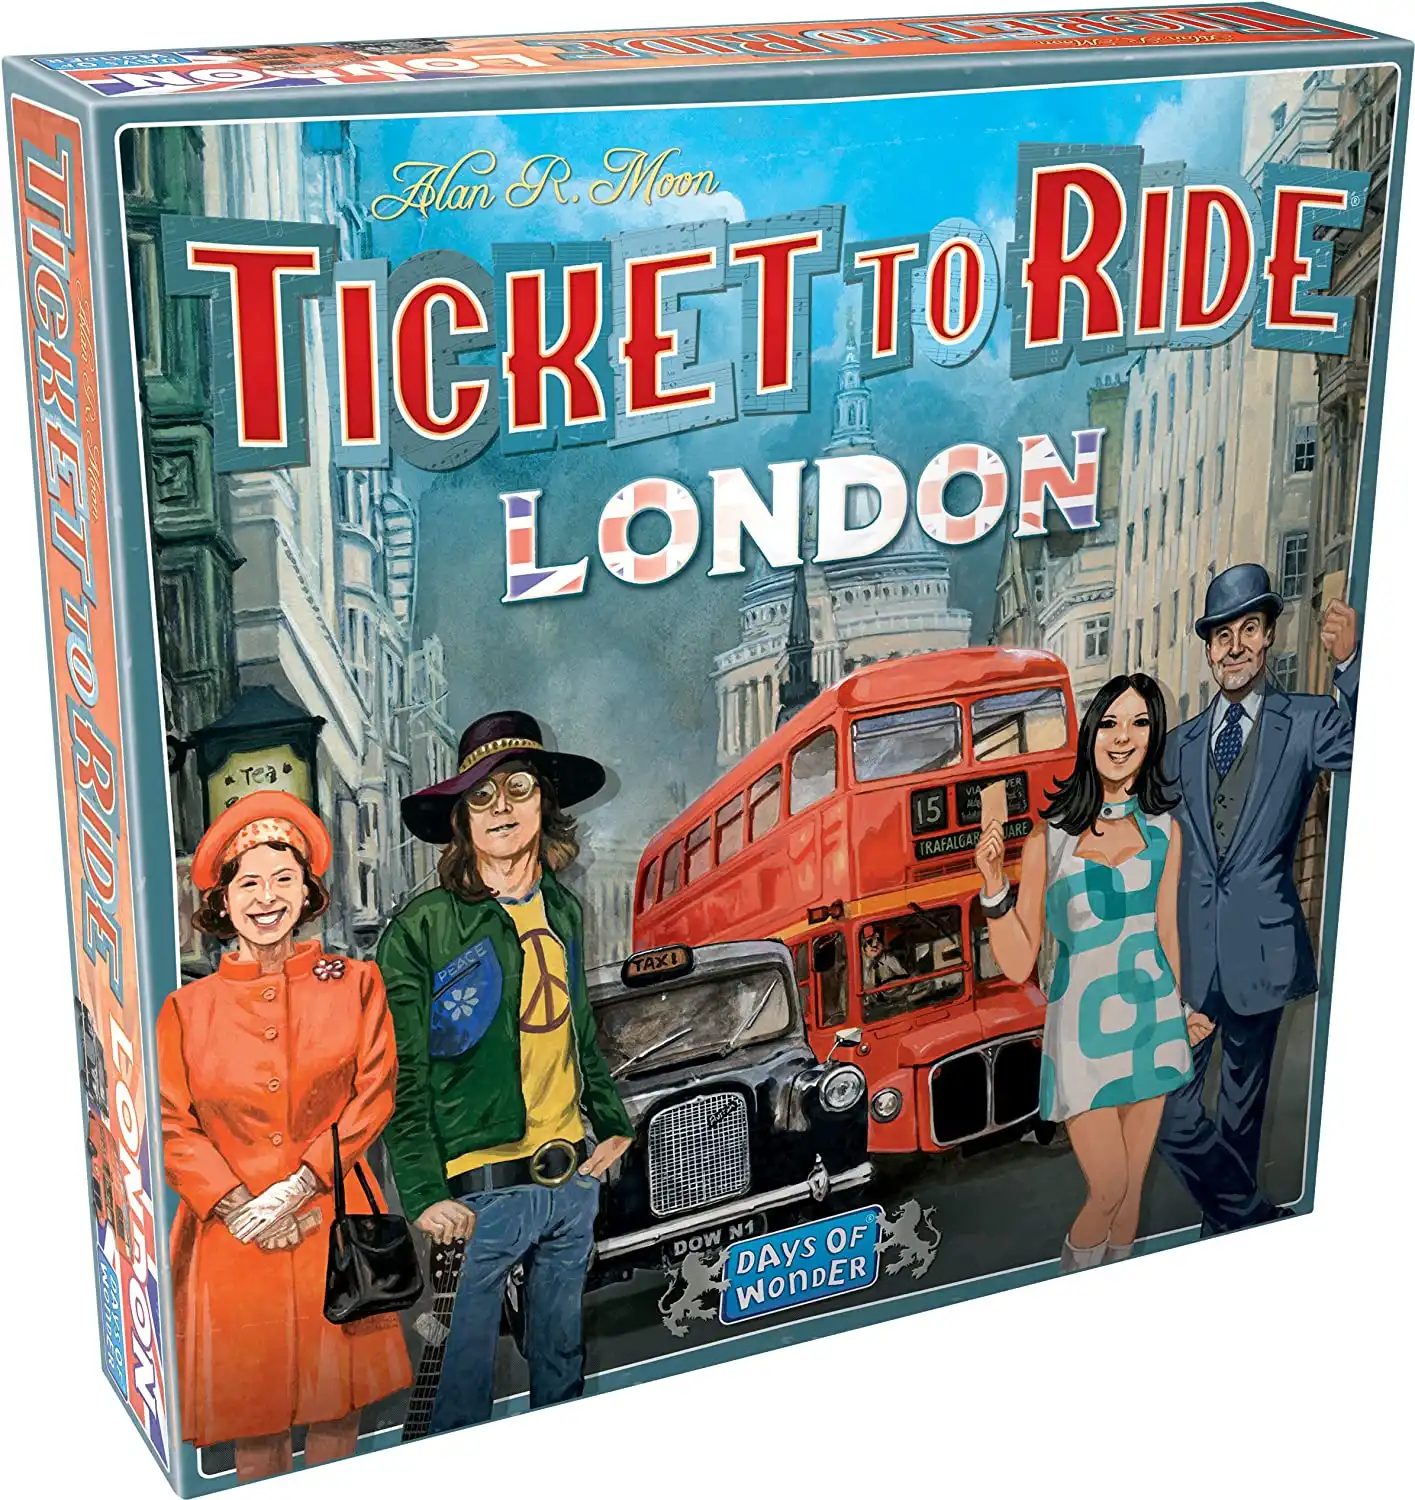 Ticket to Ride: London (2019) board game box